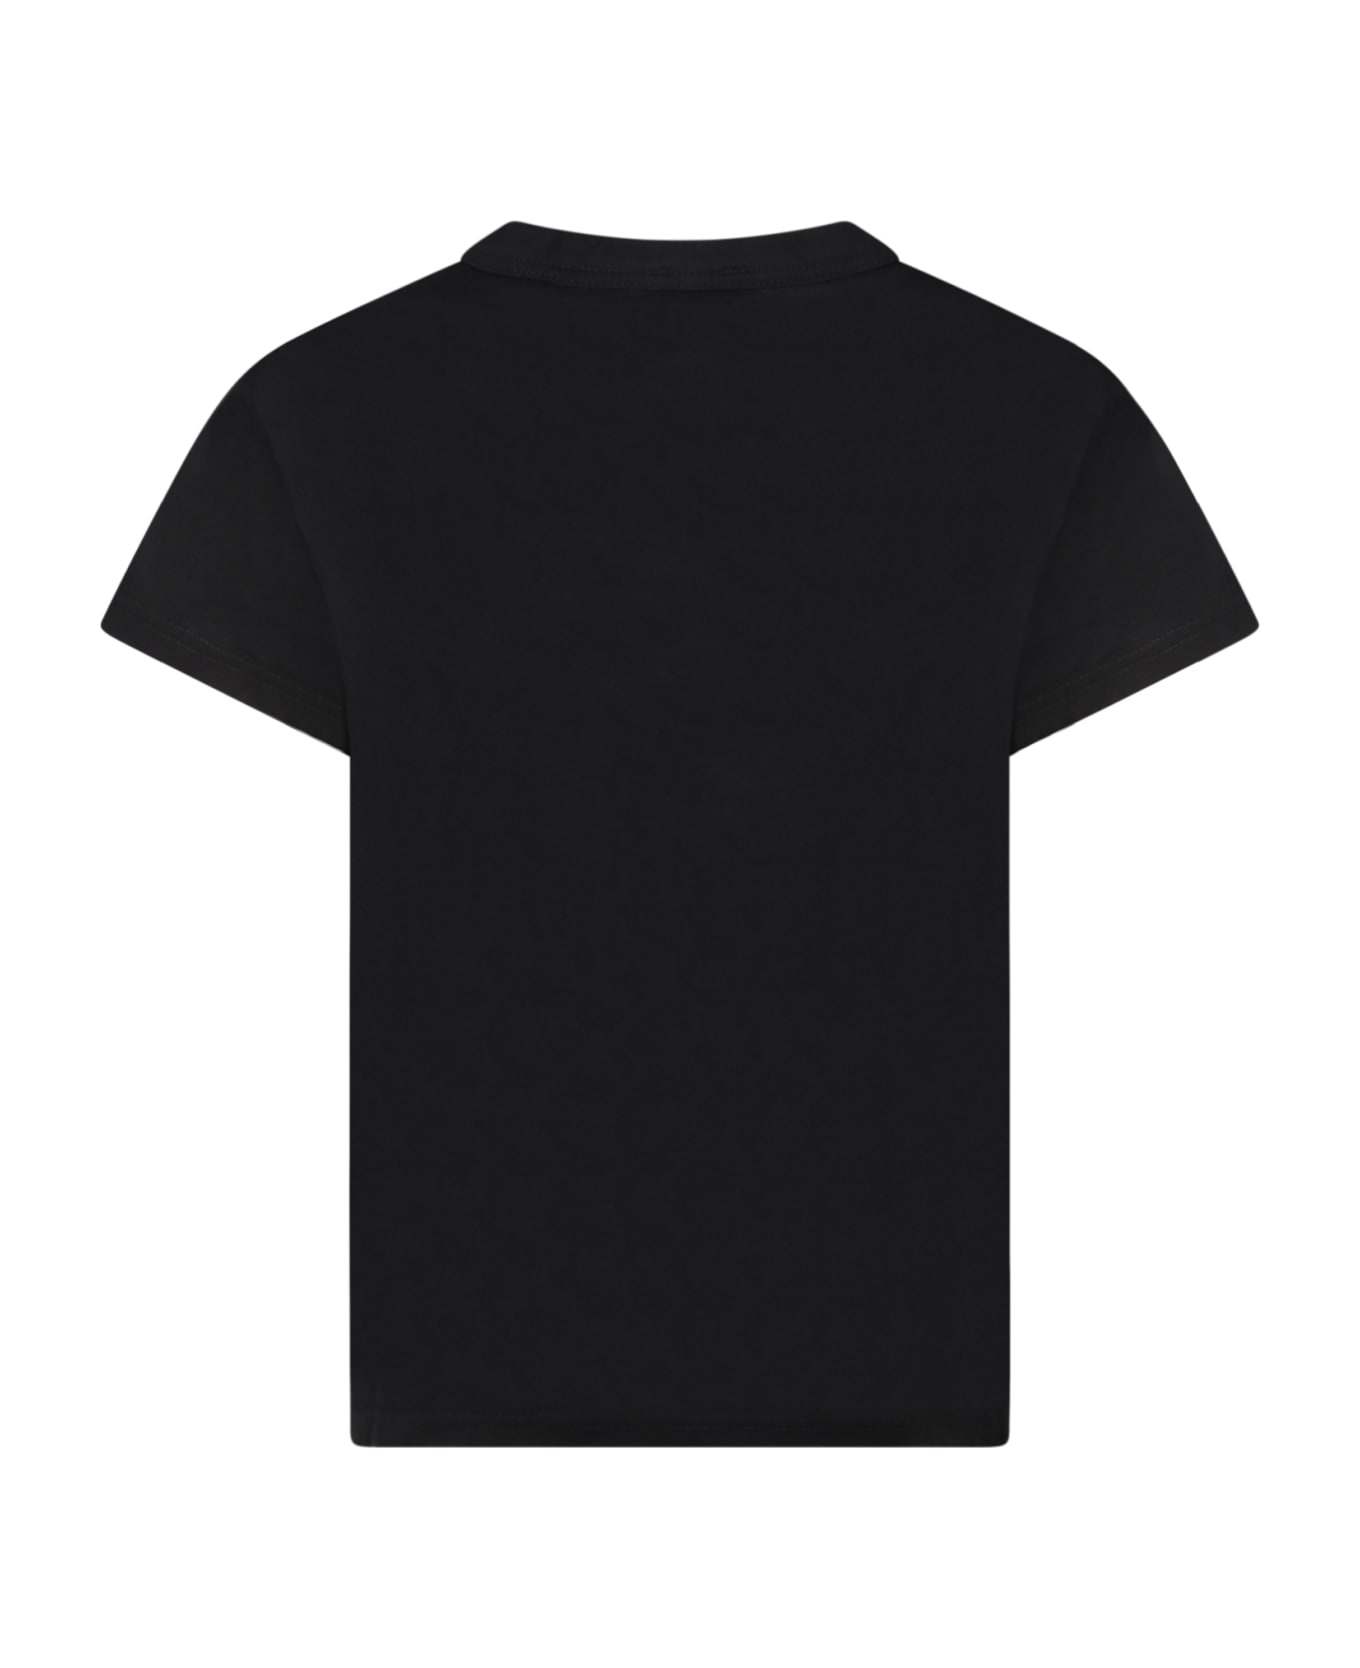 Givenchy Black T-shirt For Boy With Gray Logo - Black